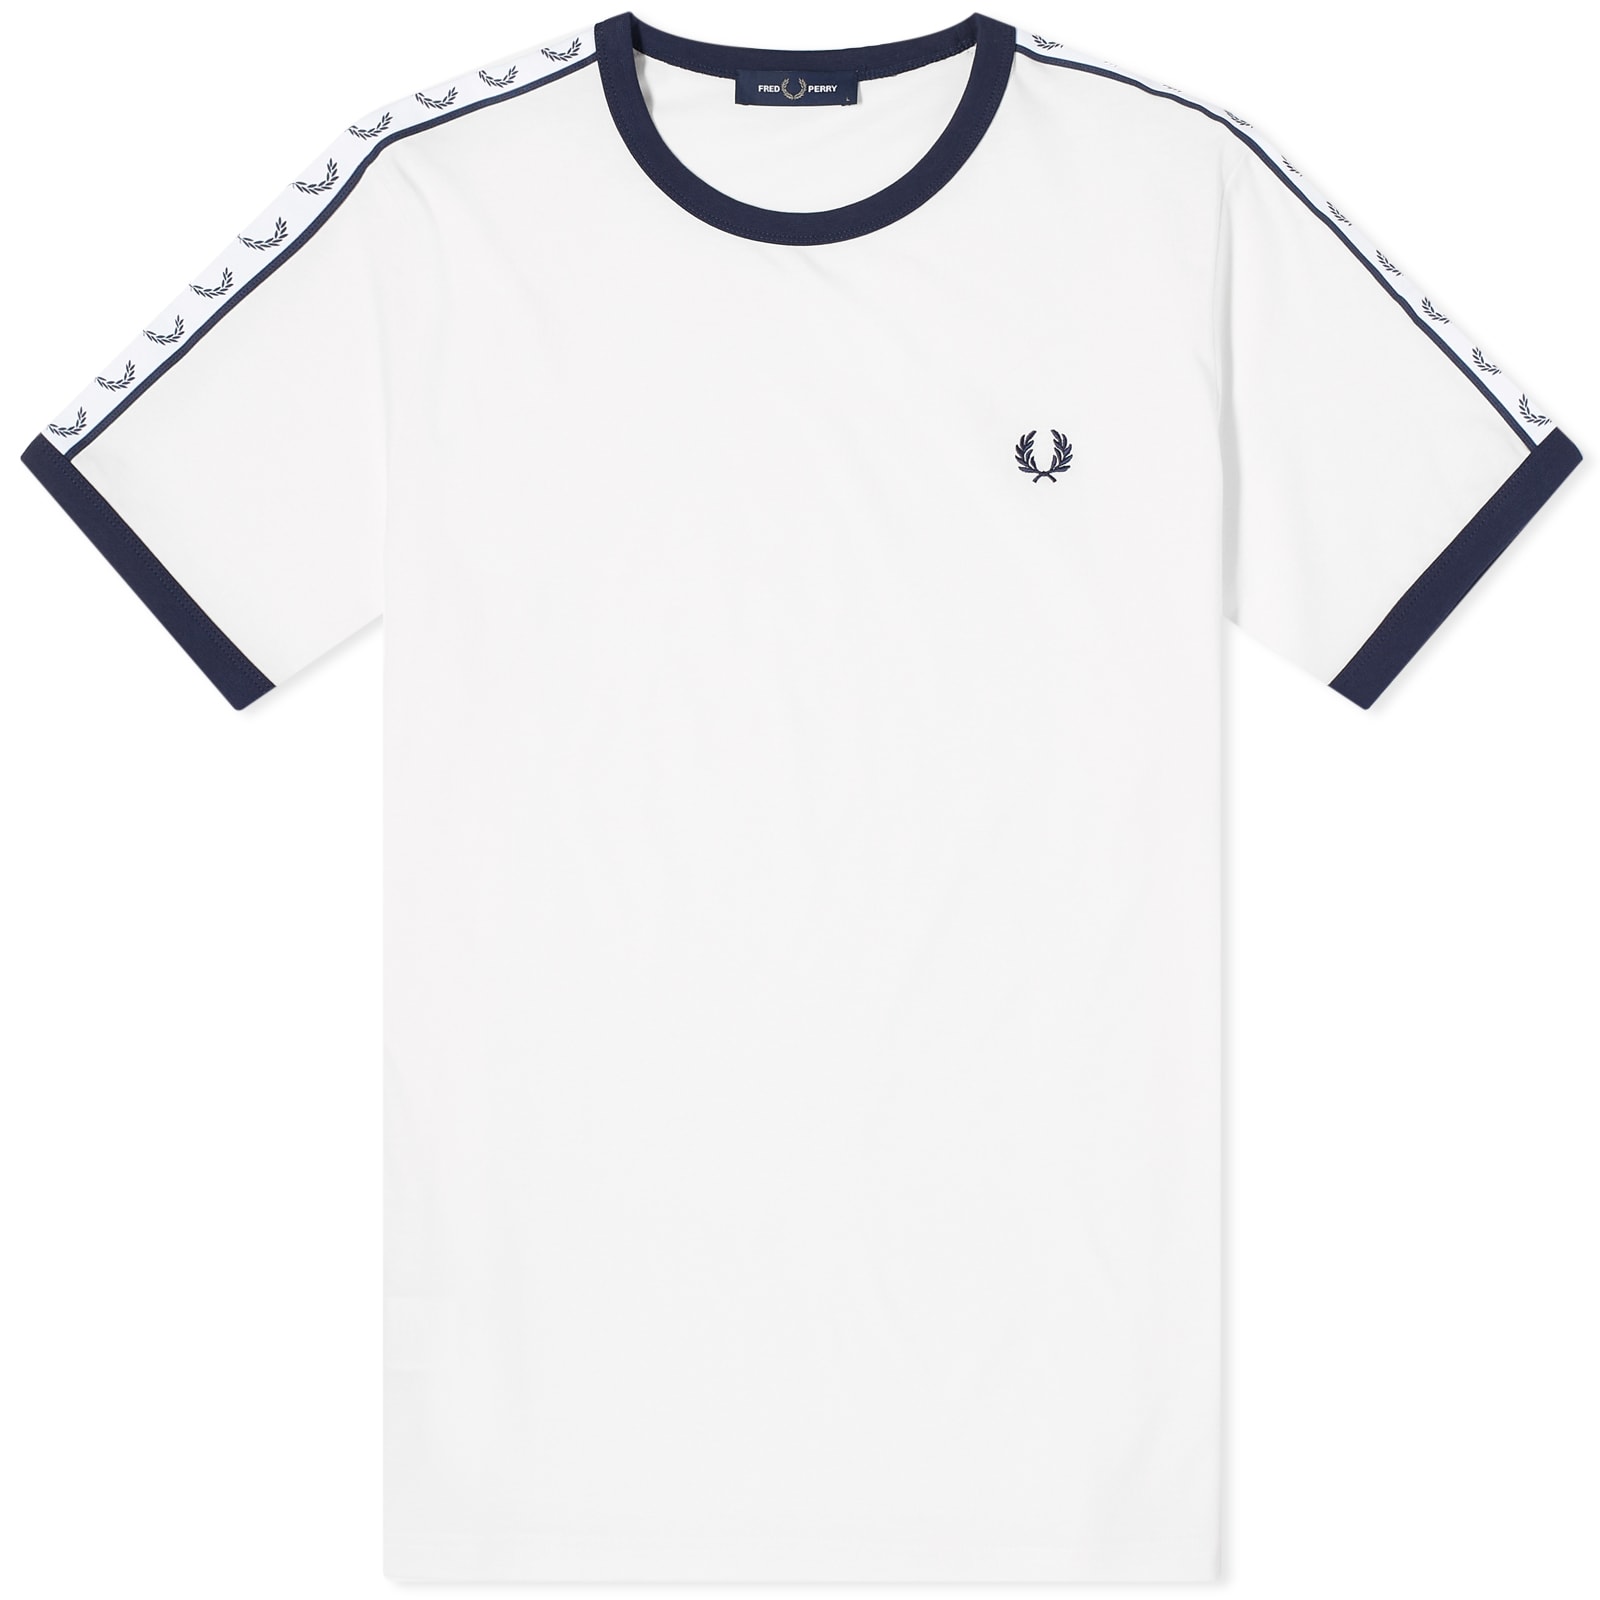 Футболка Fred Perry Taped Ringer, белый футболка fred perry taped ringer tee